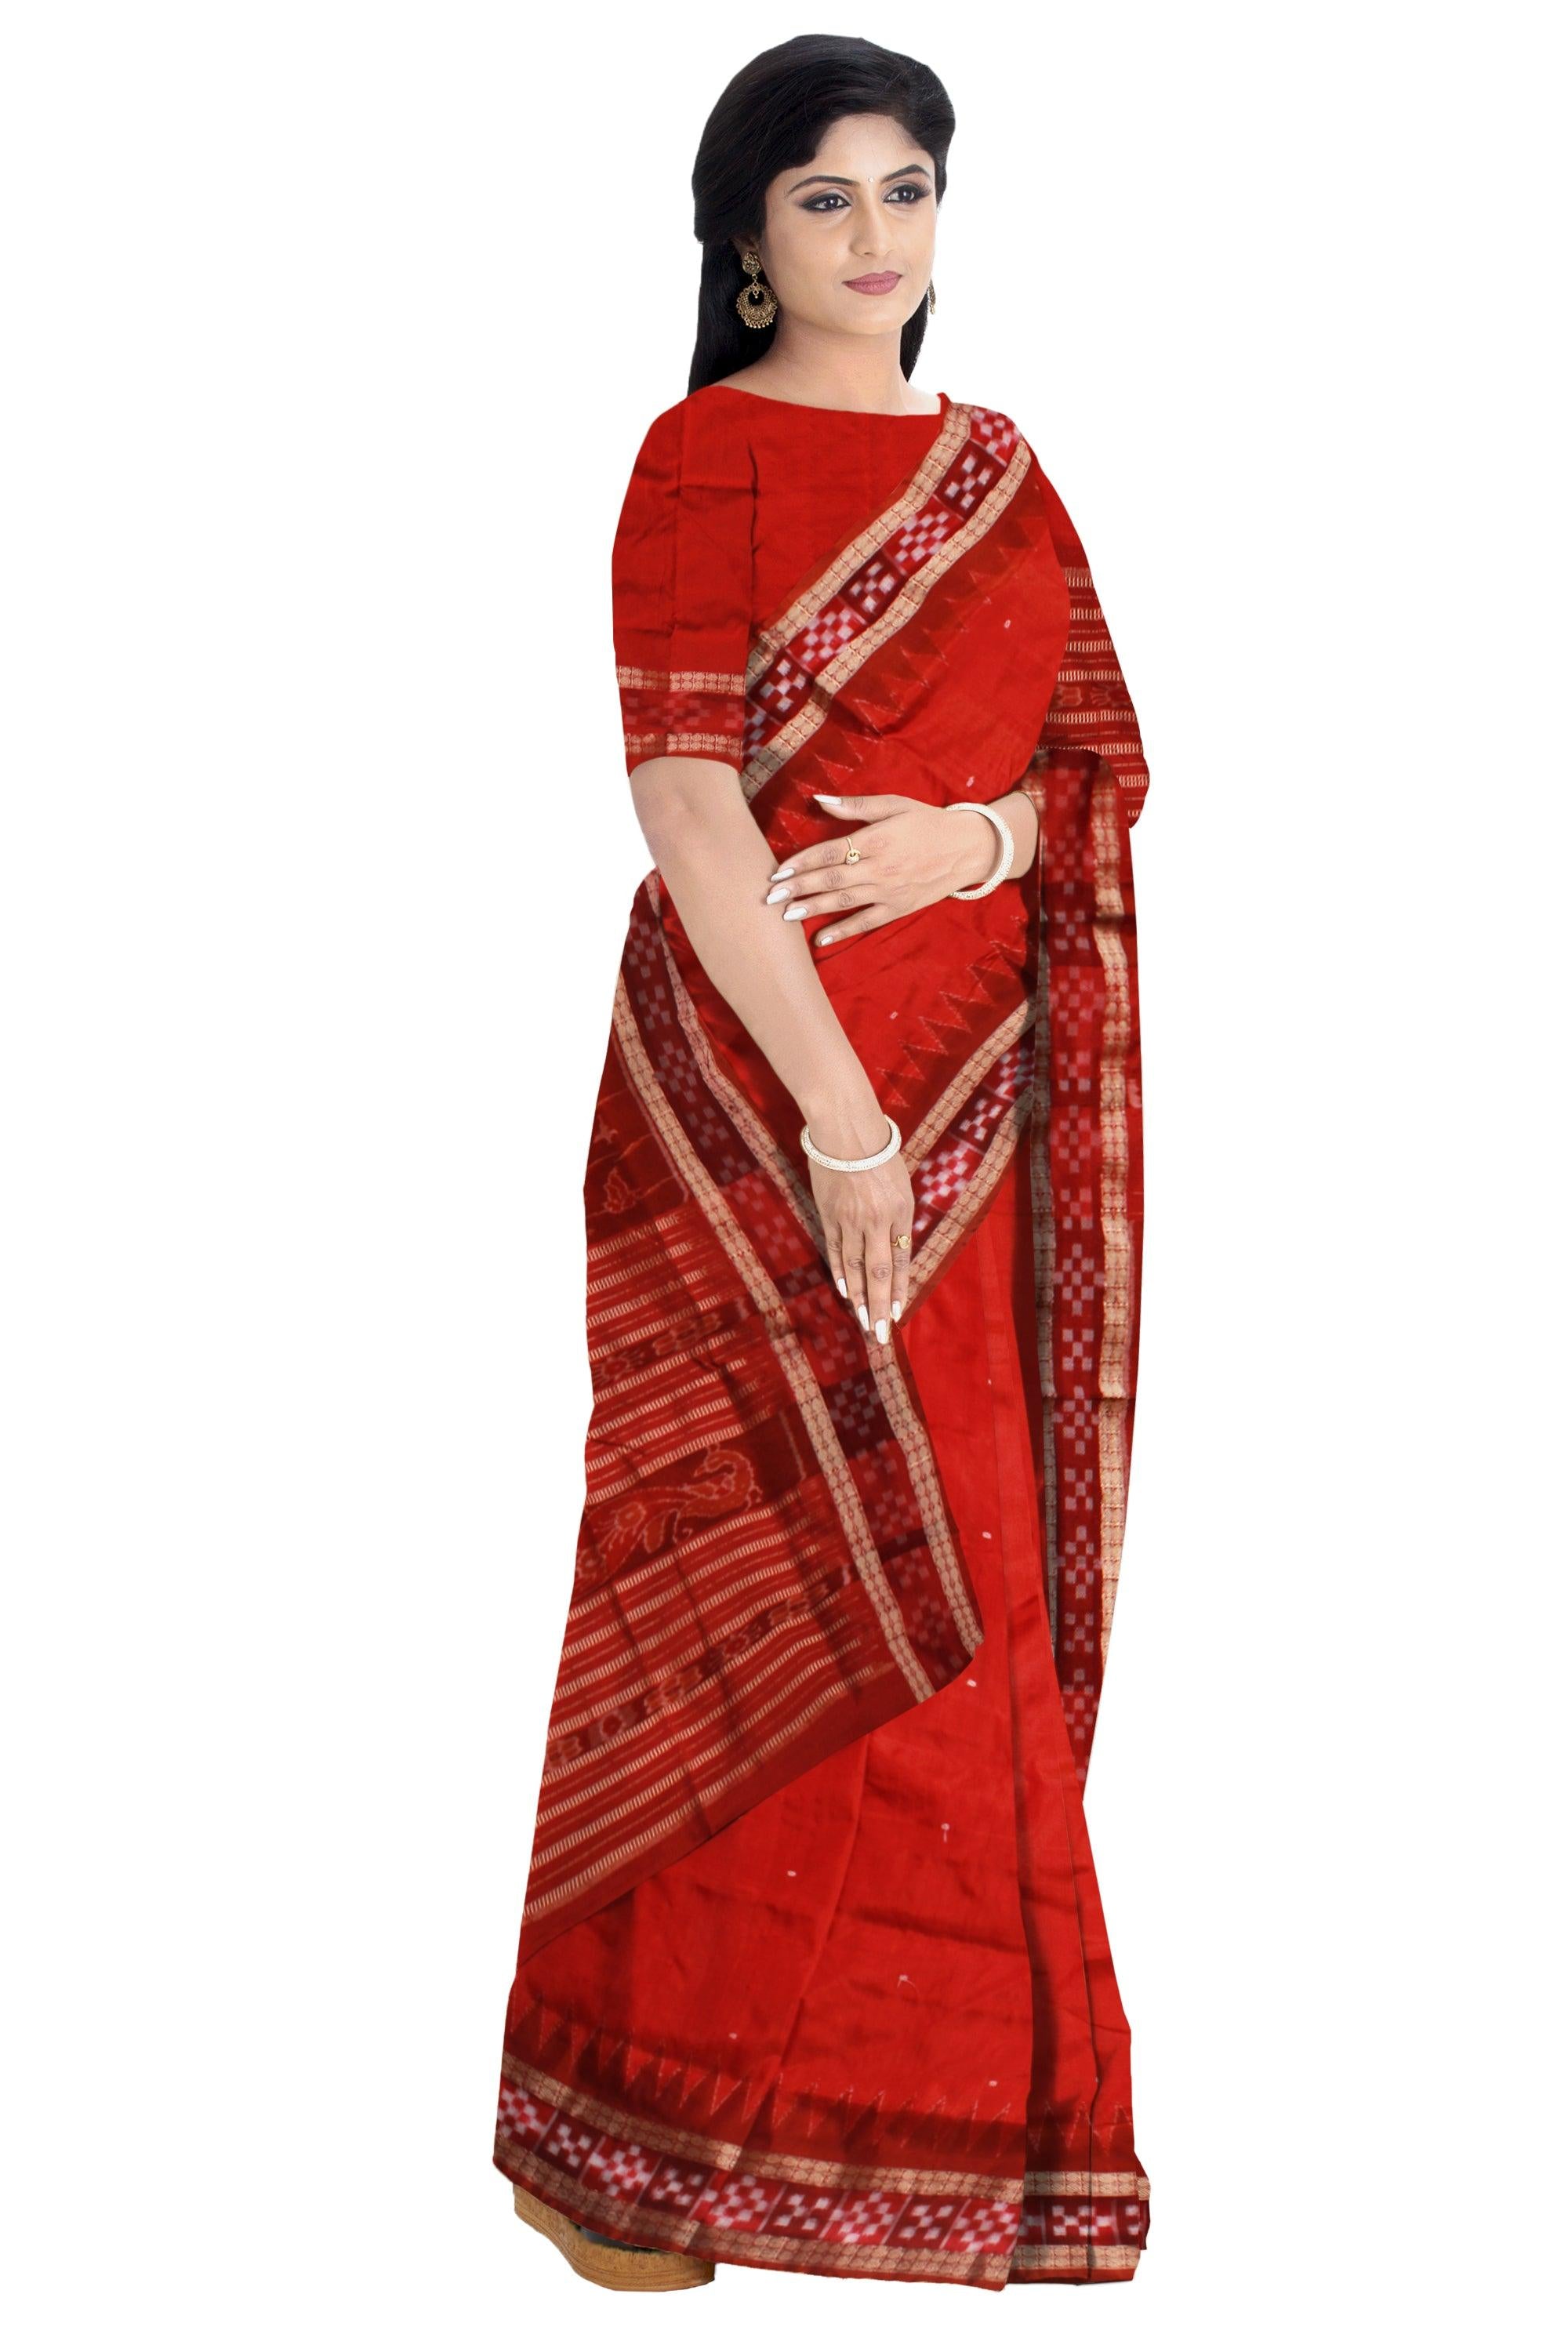 RED AND MAROON COLOR DHADI SAPTA PATA  , ITS PALLU IS PEACOCK PRINT ATTACHED WITH BLOUSE PIECE. - Koshali Arts & Crafts Enterprise